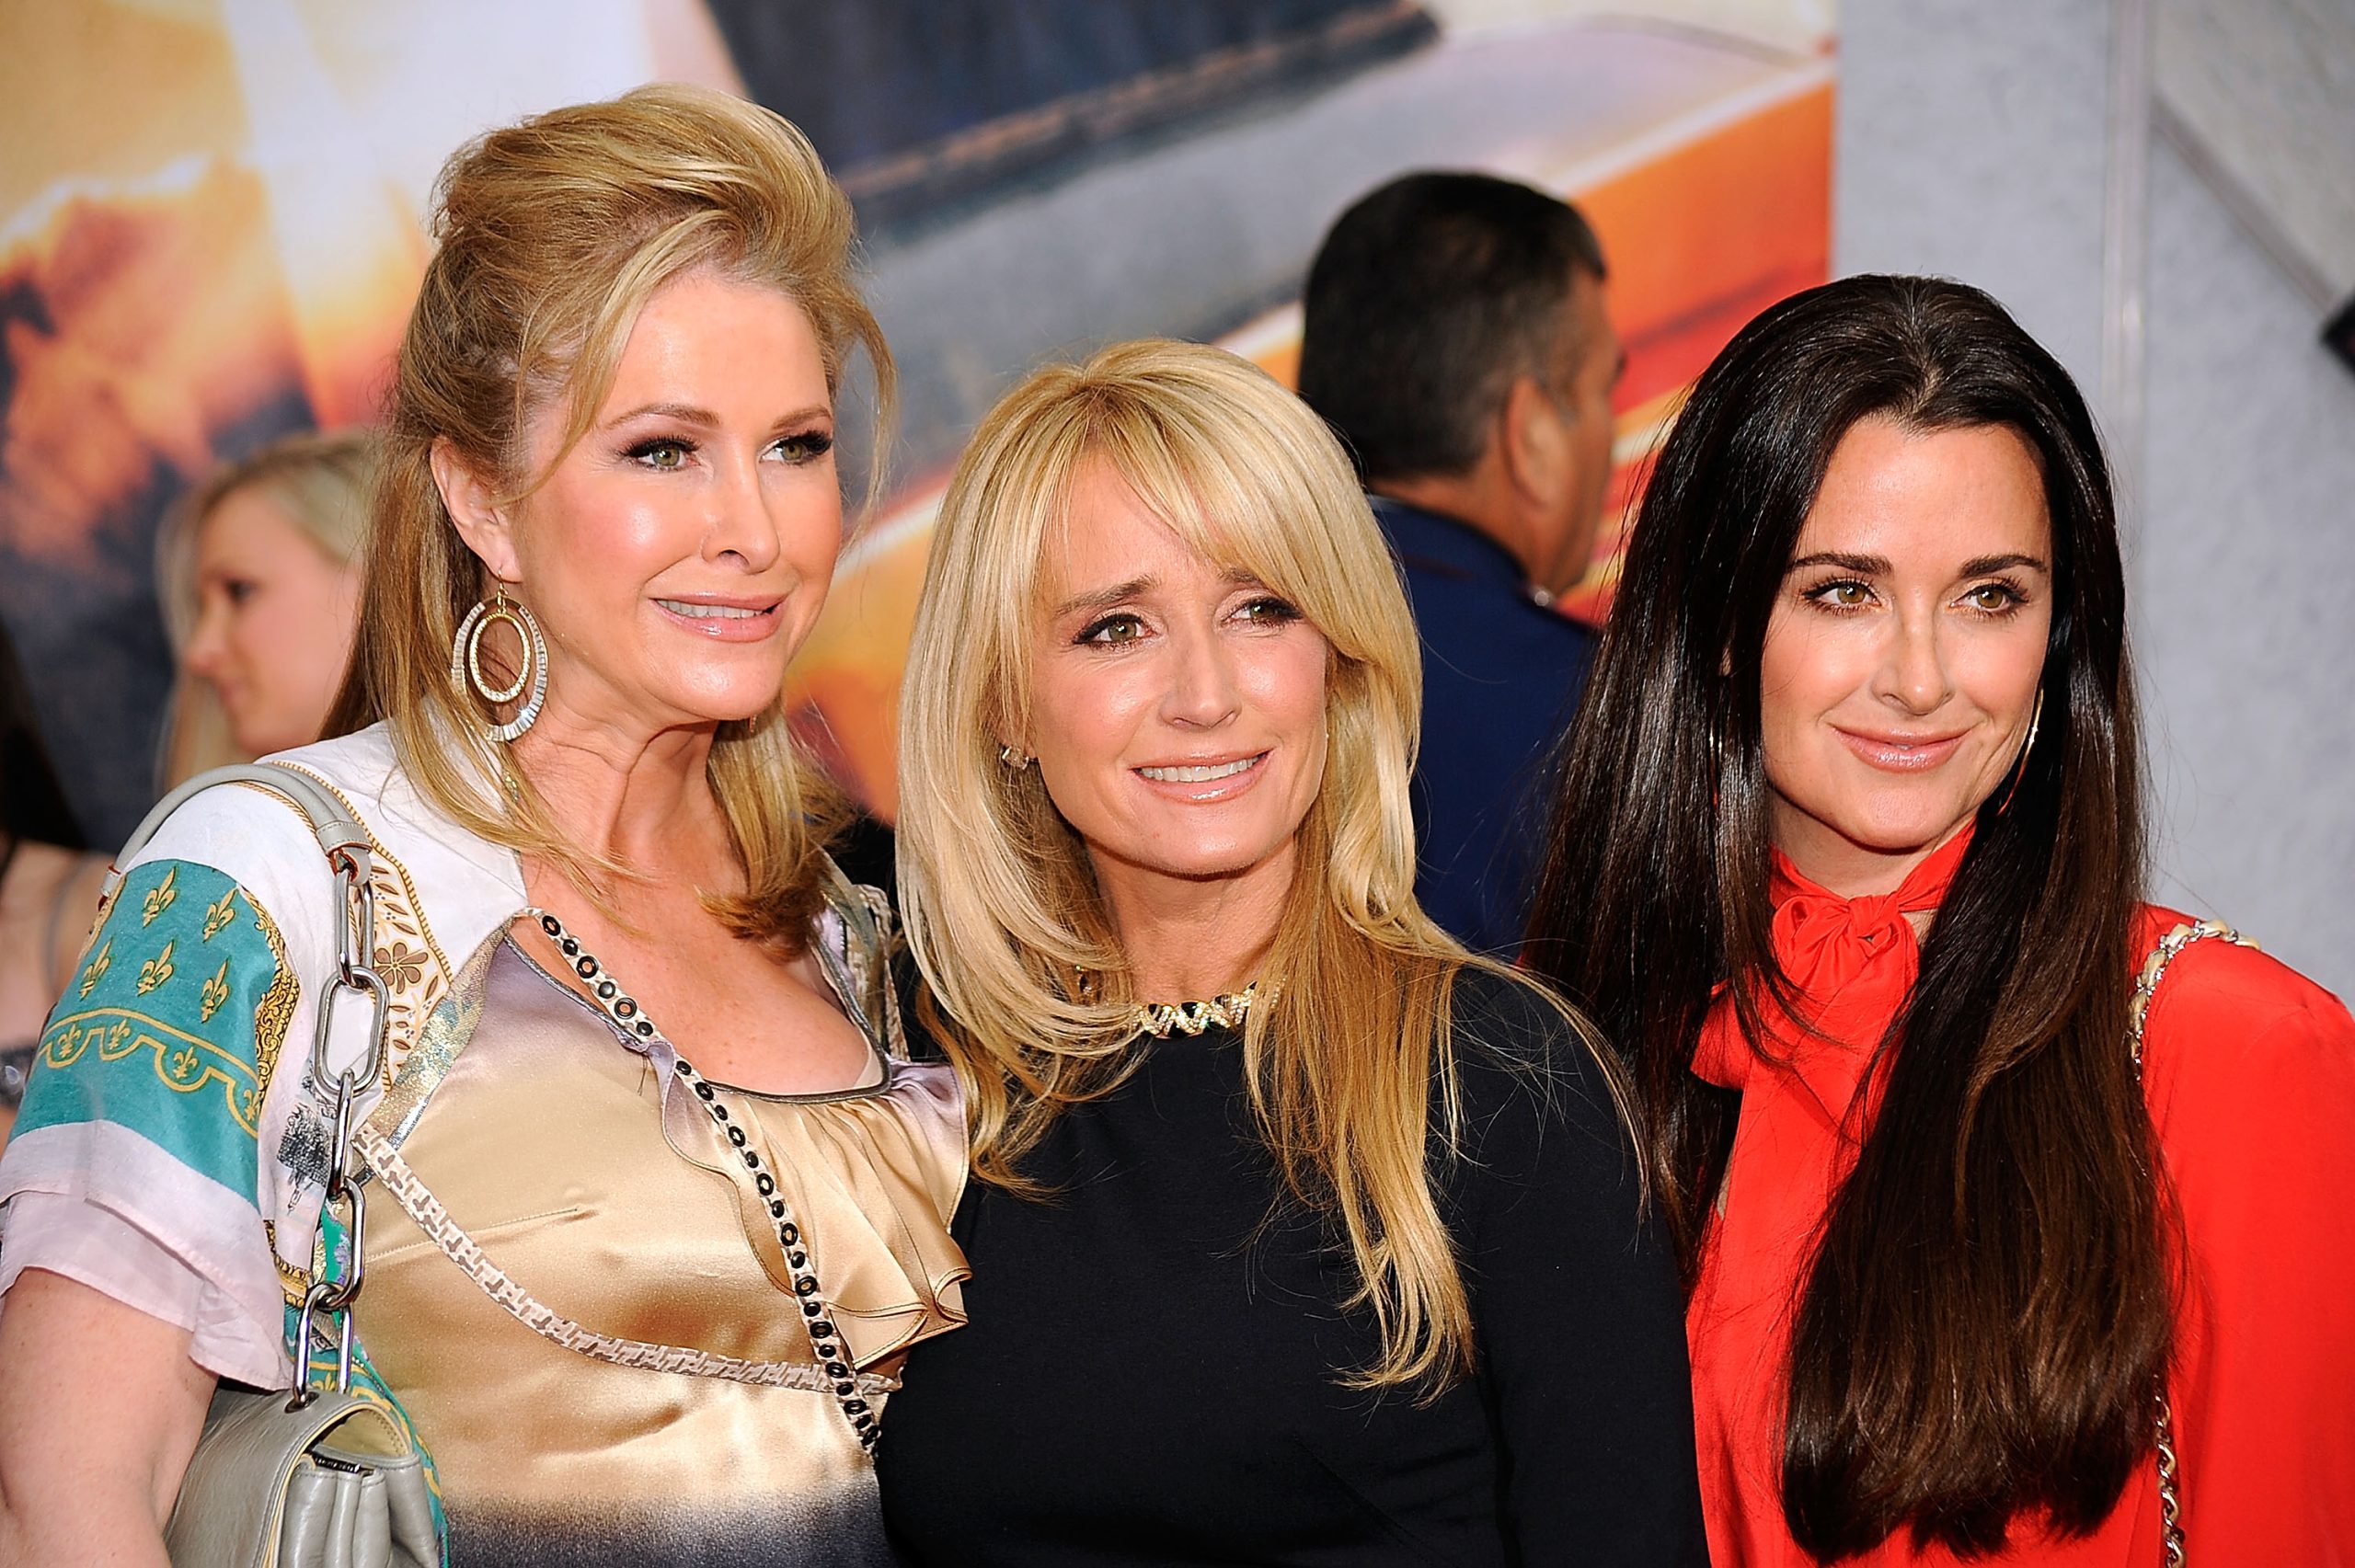 Kyle Richards Says It’s ‘Very Difficult’ to Film ‘RHOBH’ With Kathy Hilton and Kim Richards!